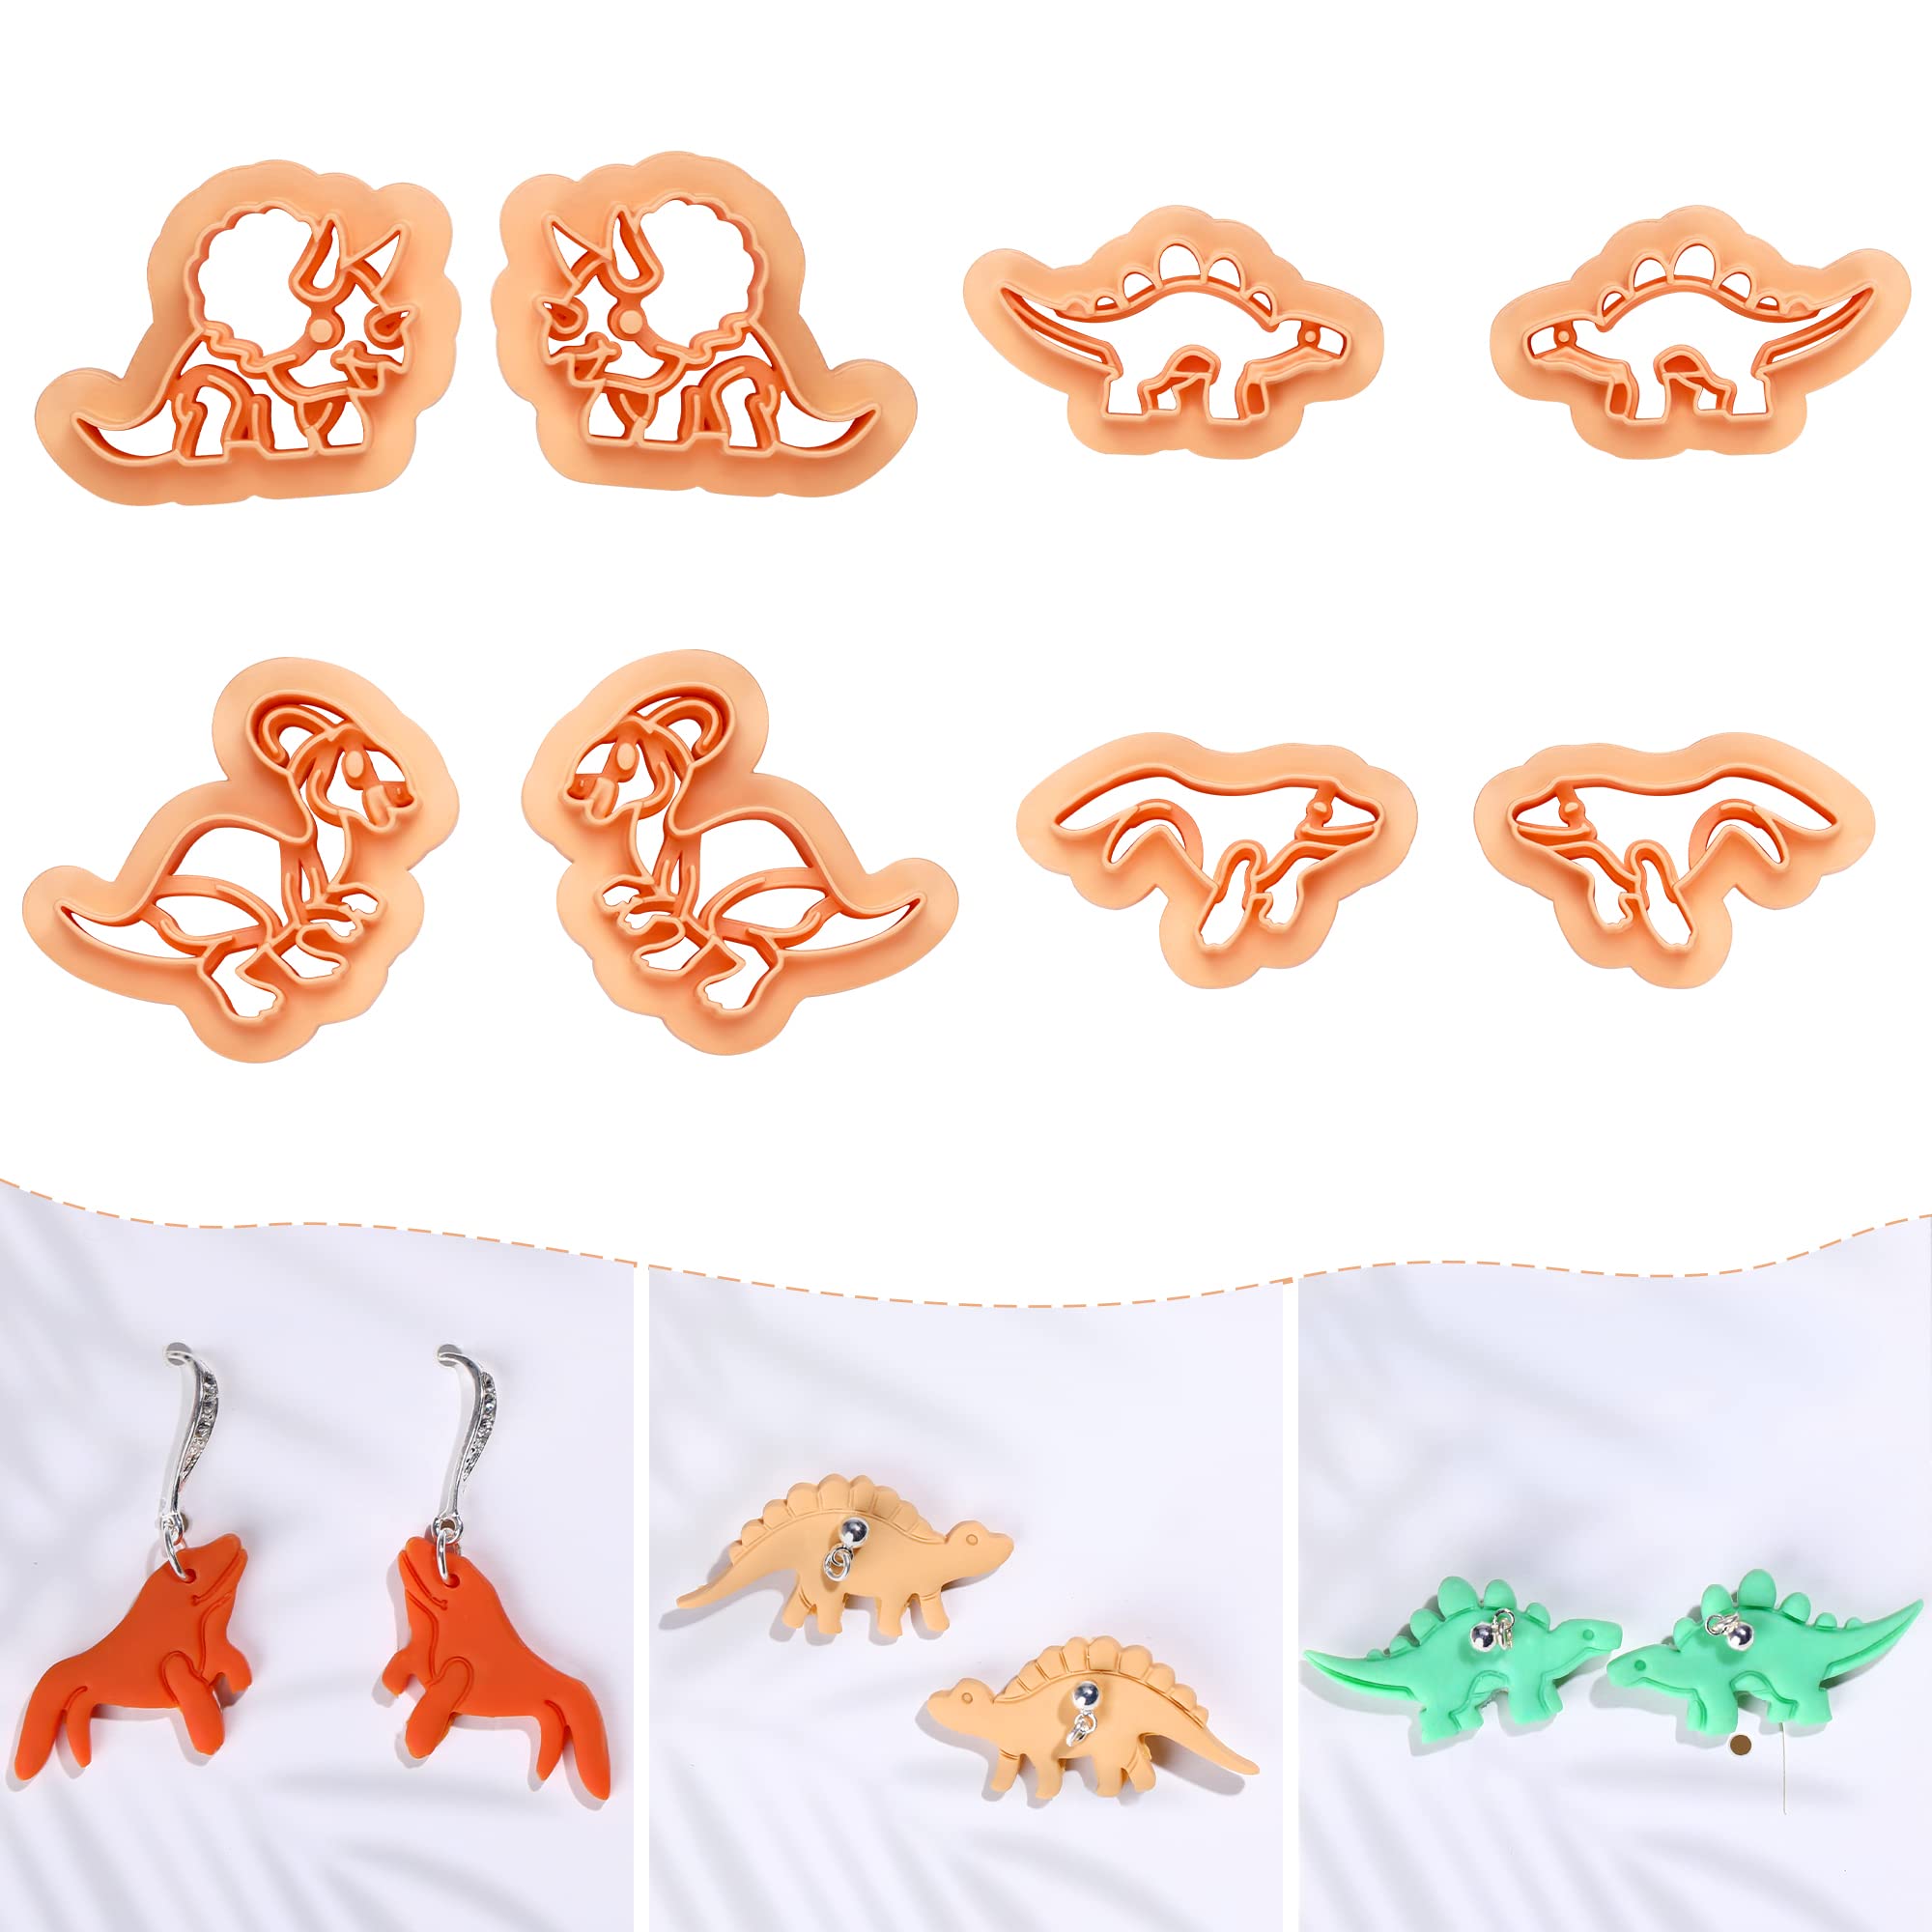 Puocaon Polymer Clay Cutters Dinosaur 8 Pcs